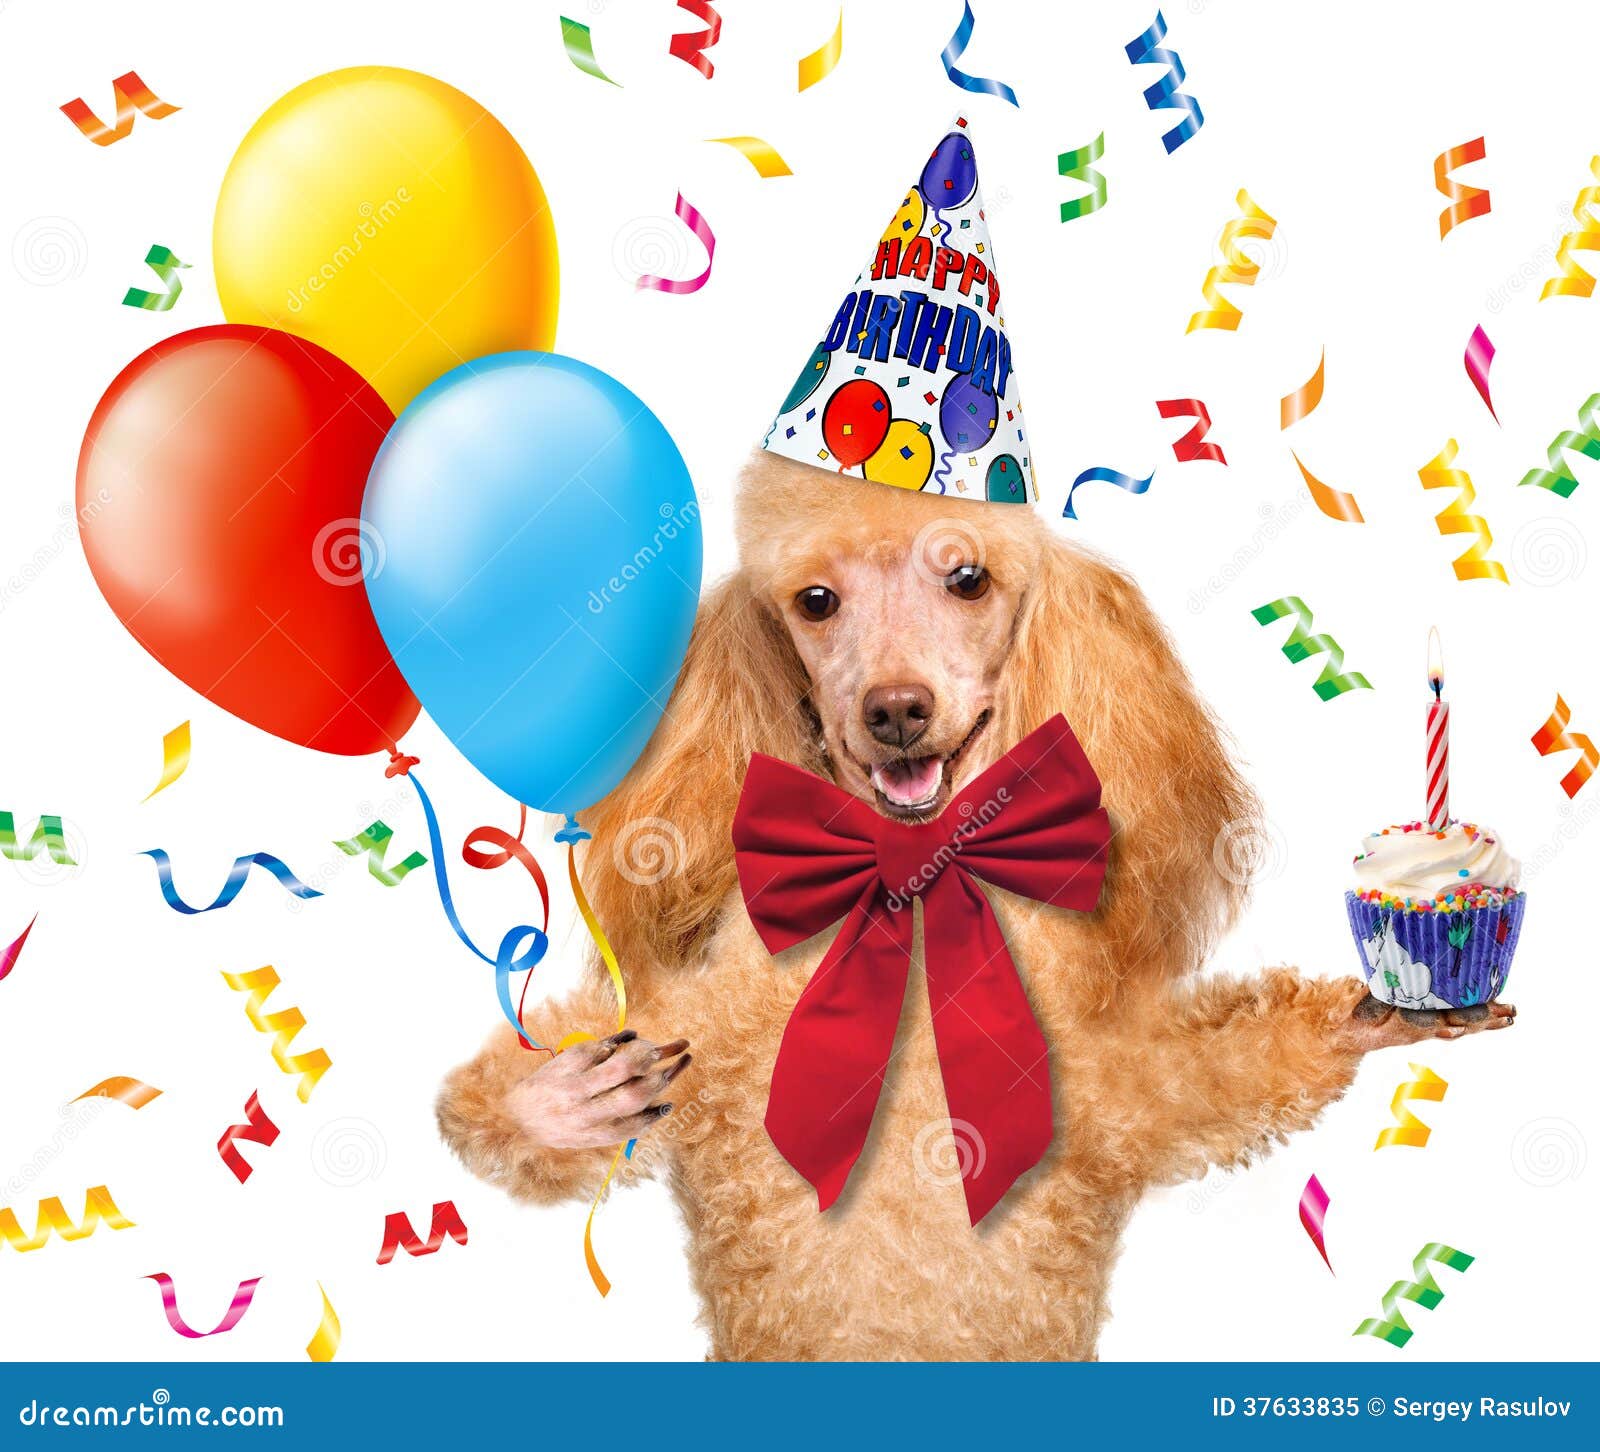 free birthday clipart with dogs - photo #29